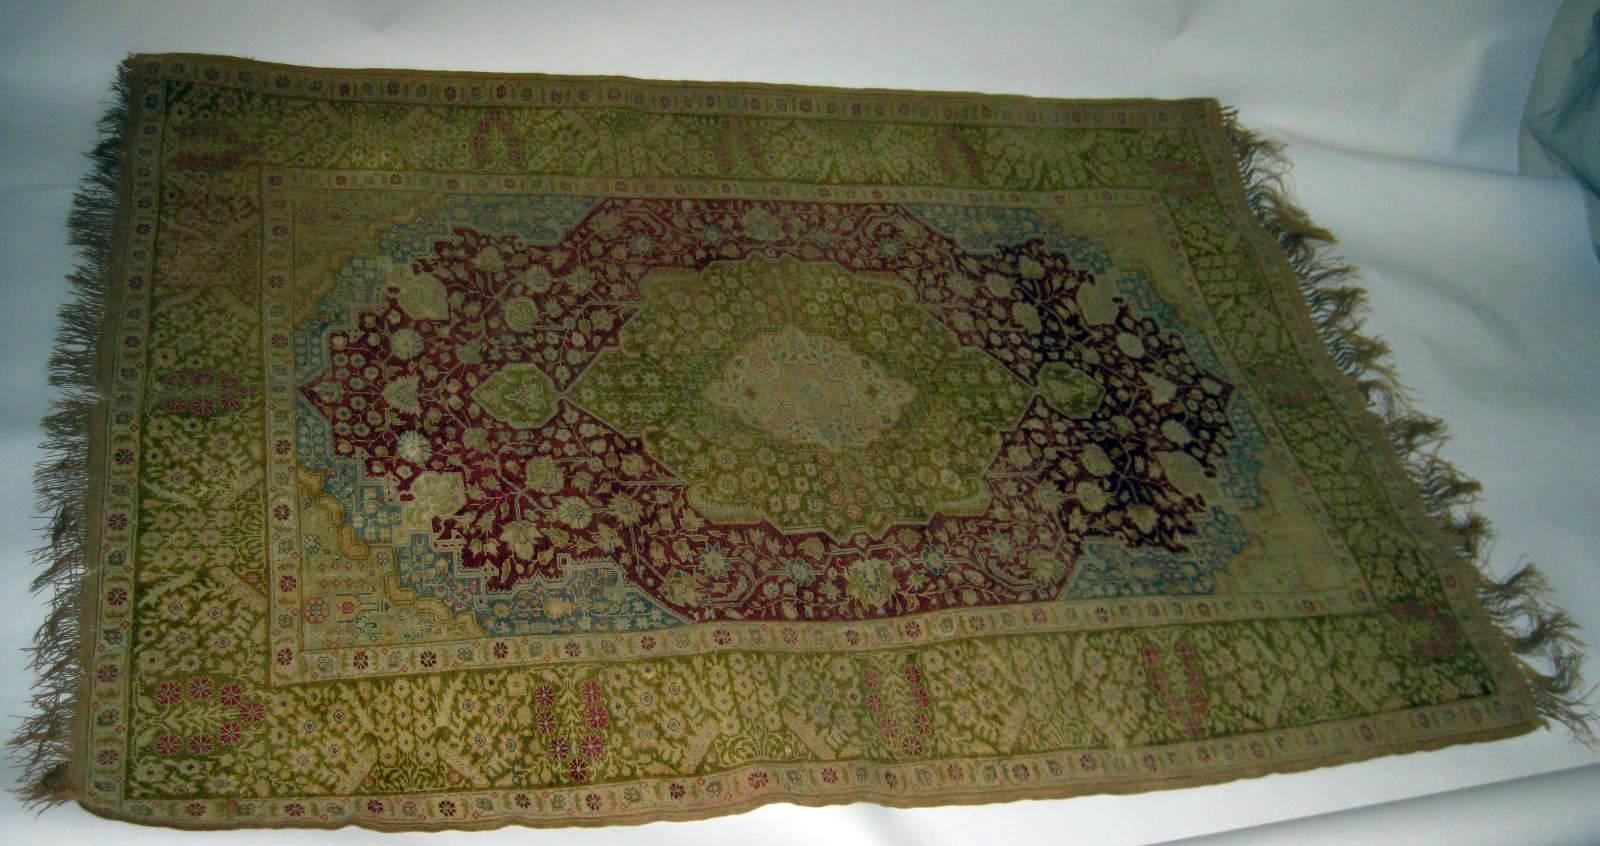 Rare silk Sivas, circa 1870-80. Silk pile on a cotton foundation featuring a delicate combination of floral and geometric designs with a cream center medallion with a small rosette on a rusty red field set inside a secondary green medallion with